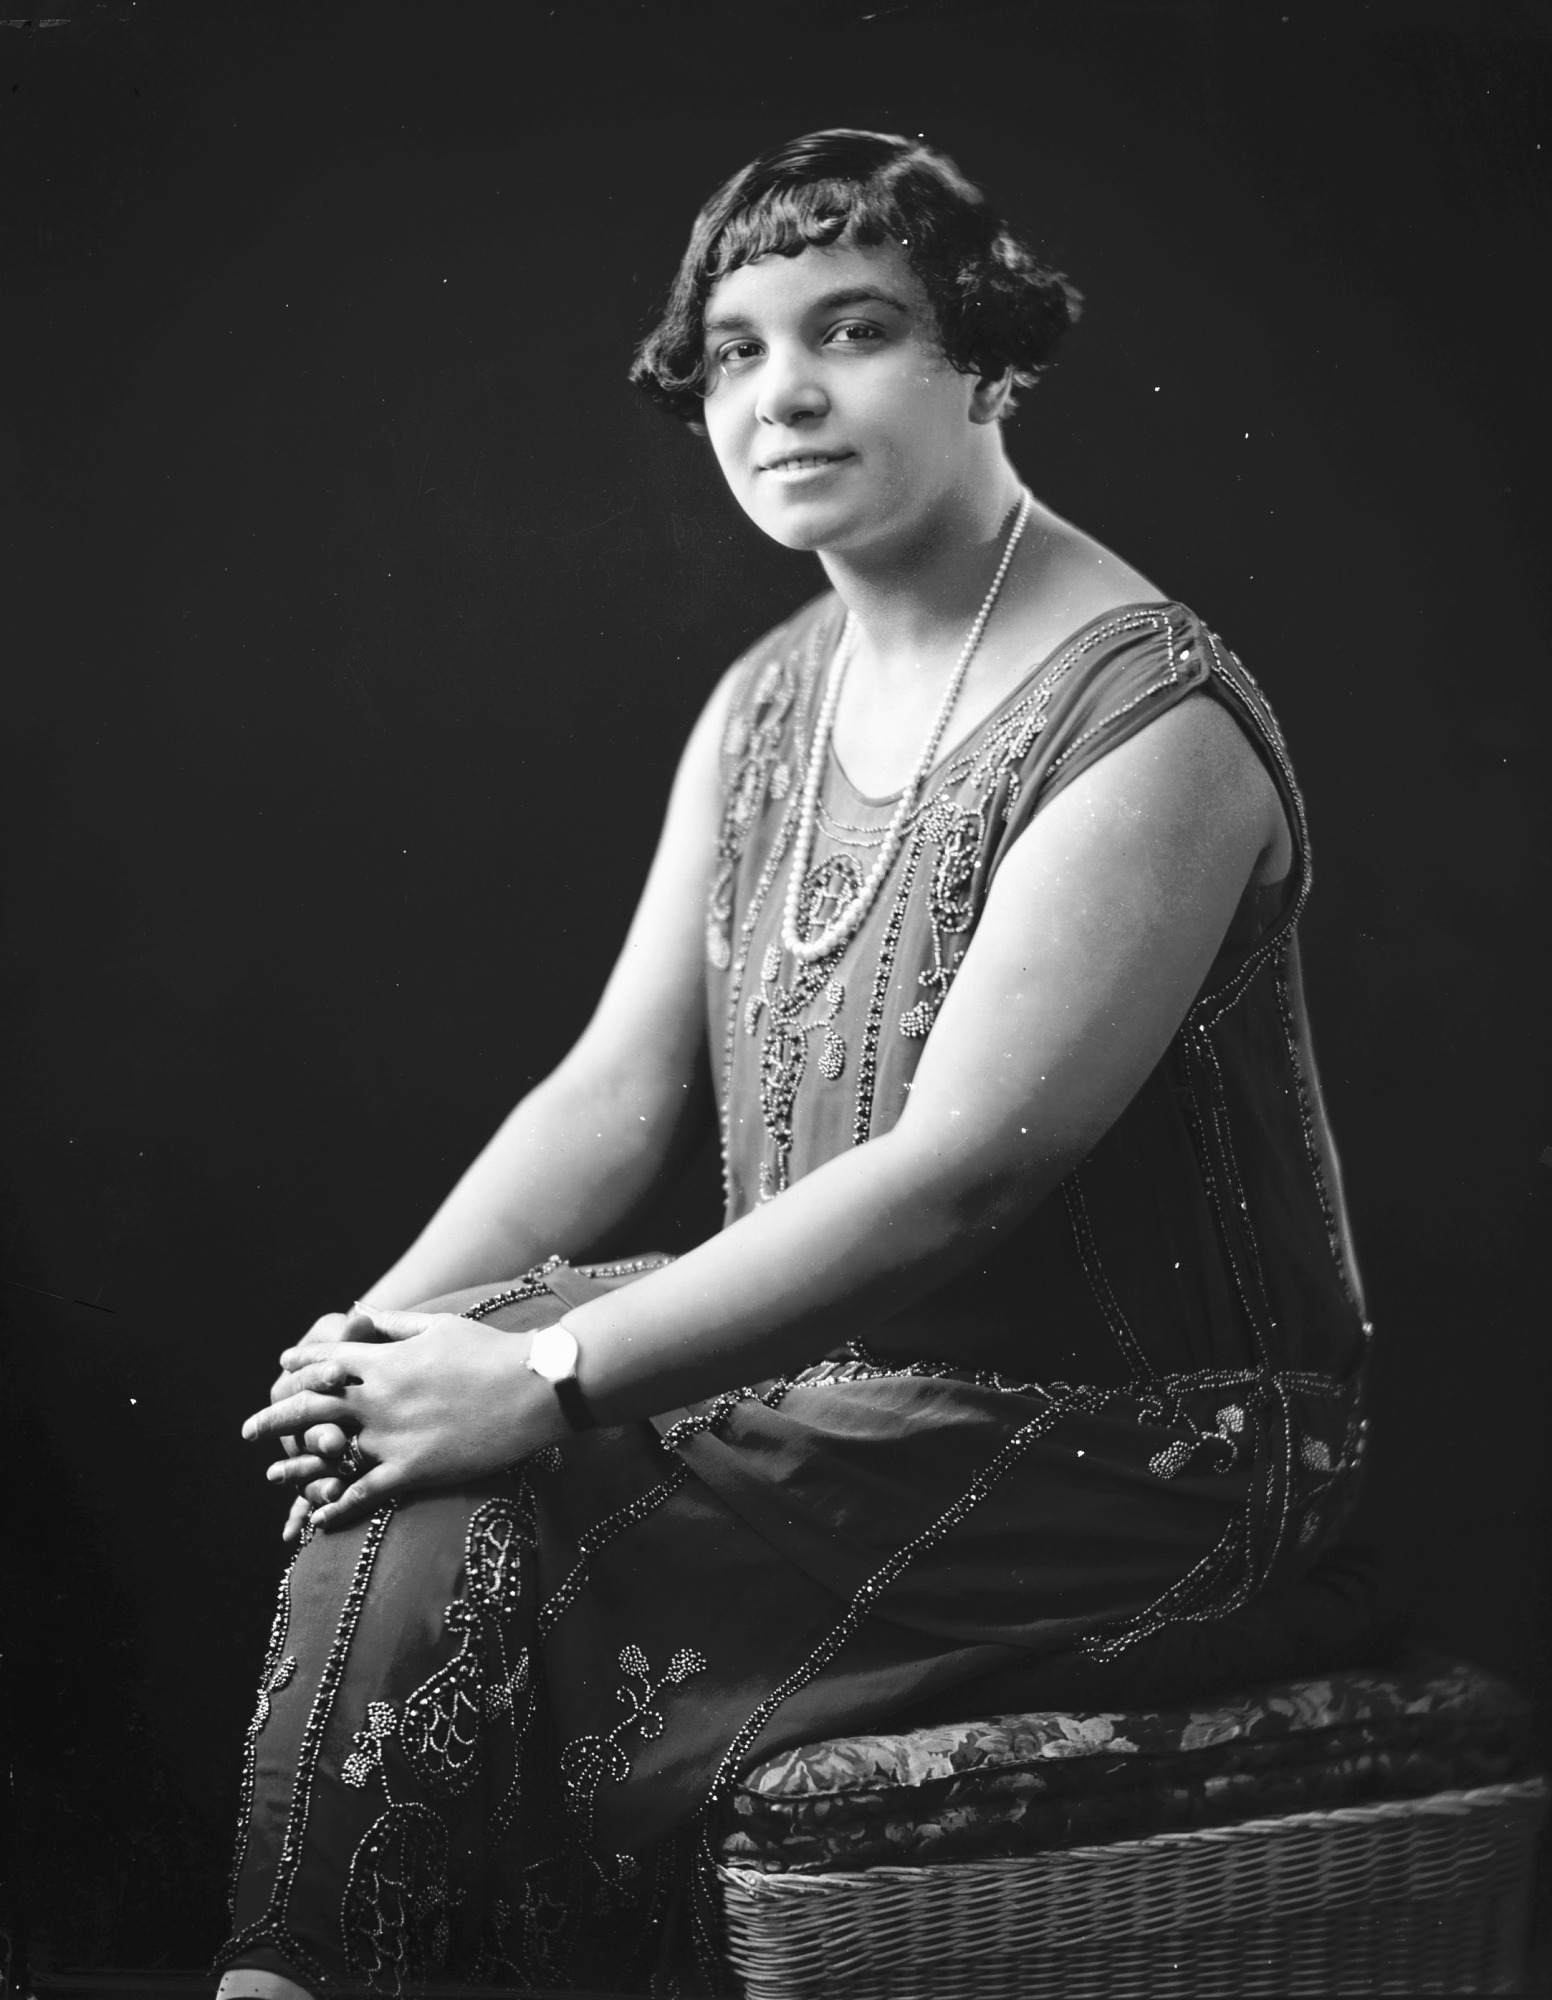 Anges Thomas sit facing the camera with her hand on her knee. She is wearing a flapper style dress with heavy embellishments and a long strand of pearls, circa 1920.